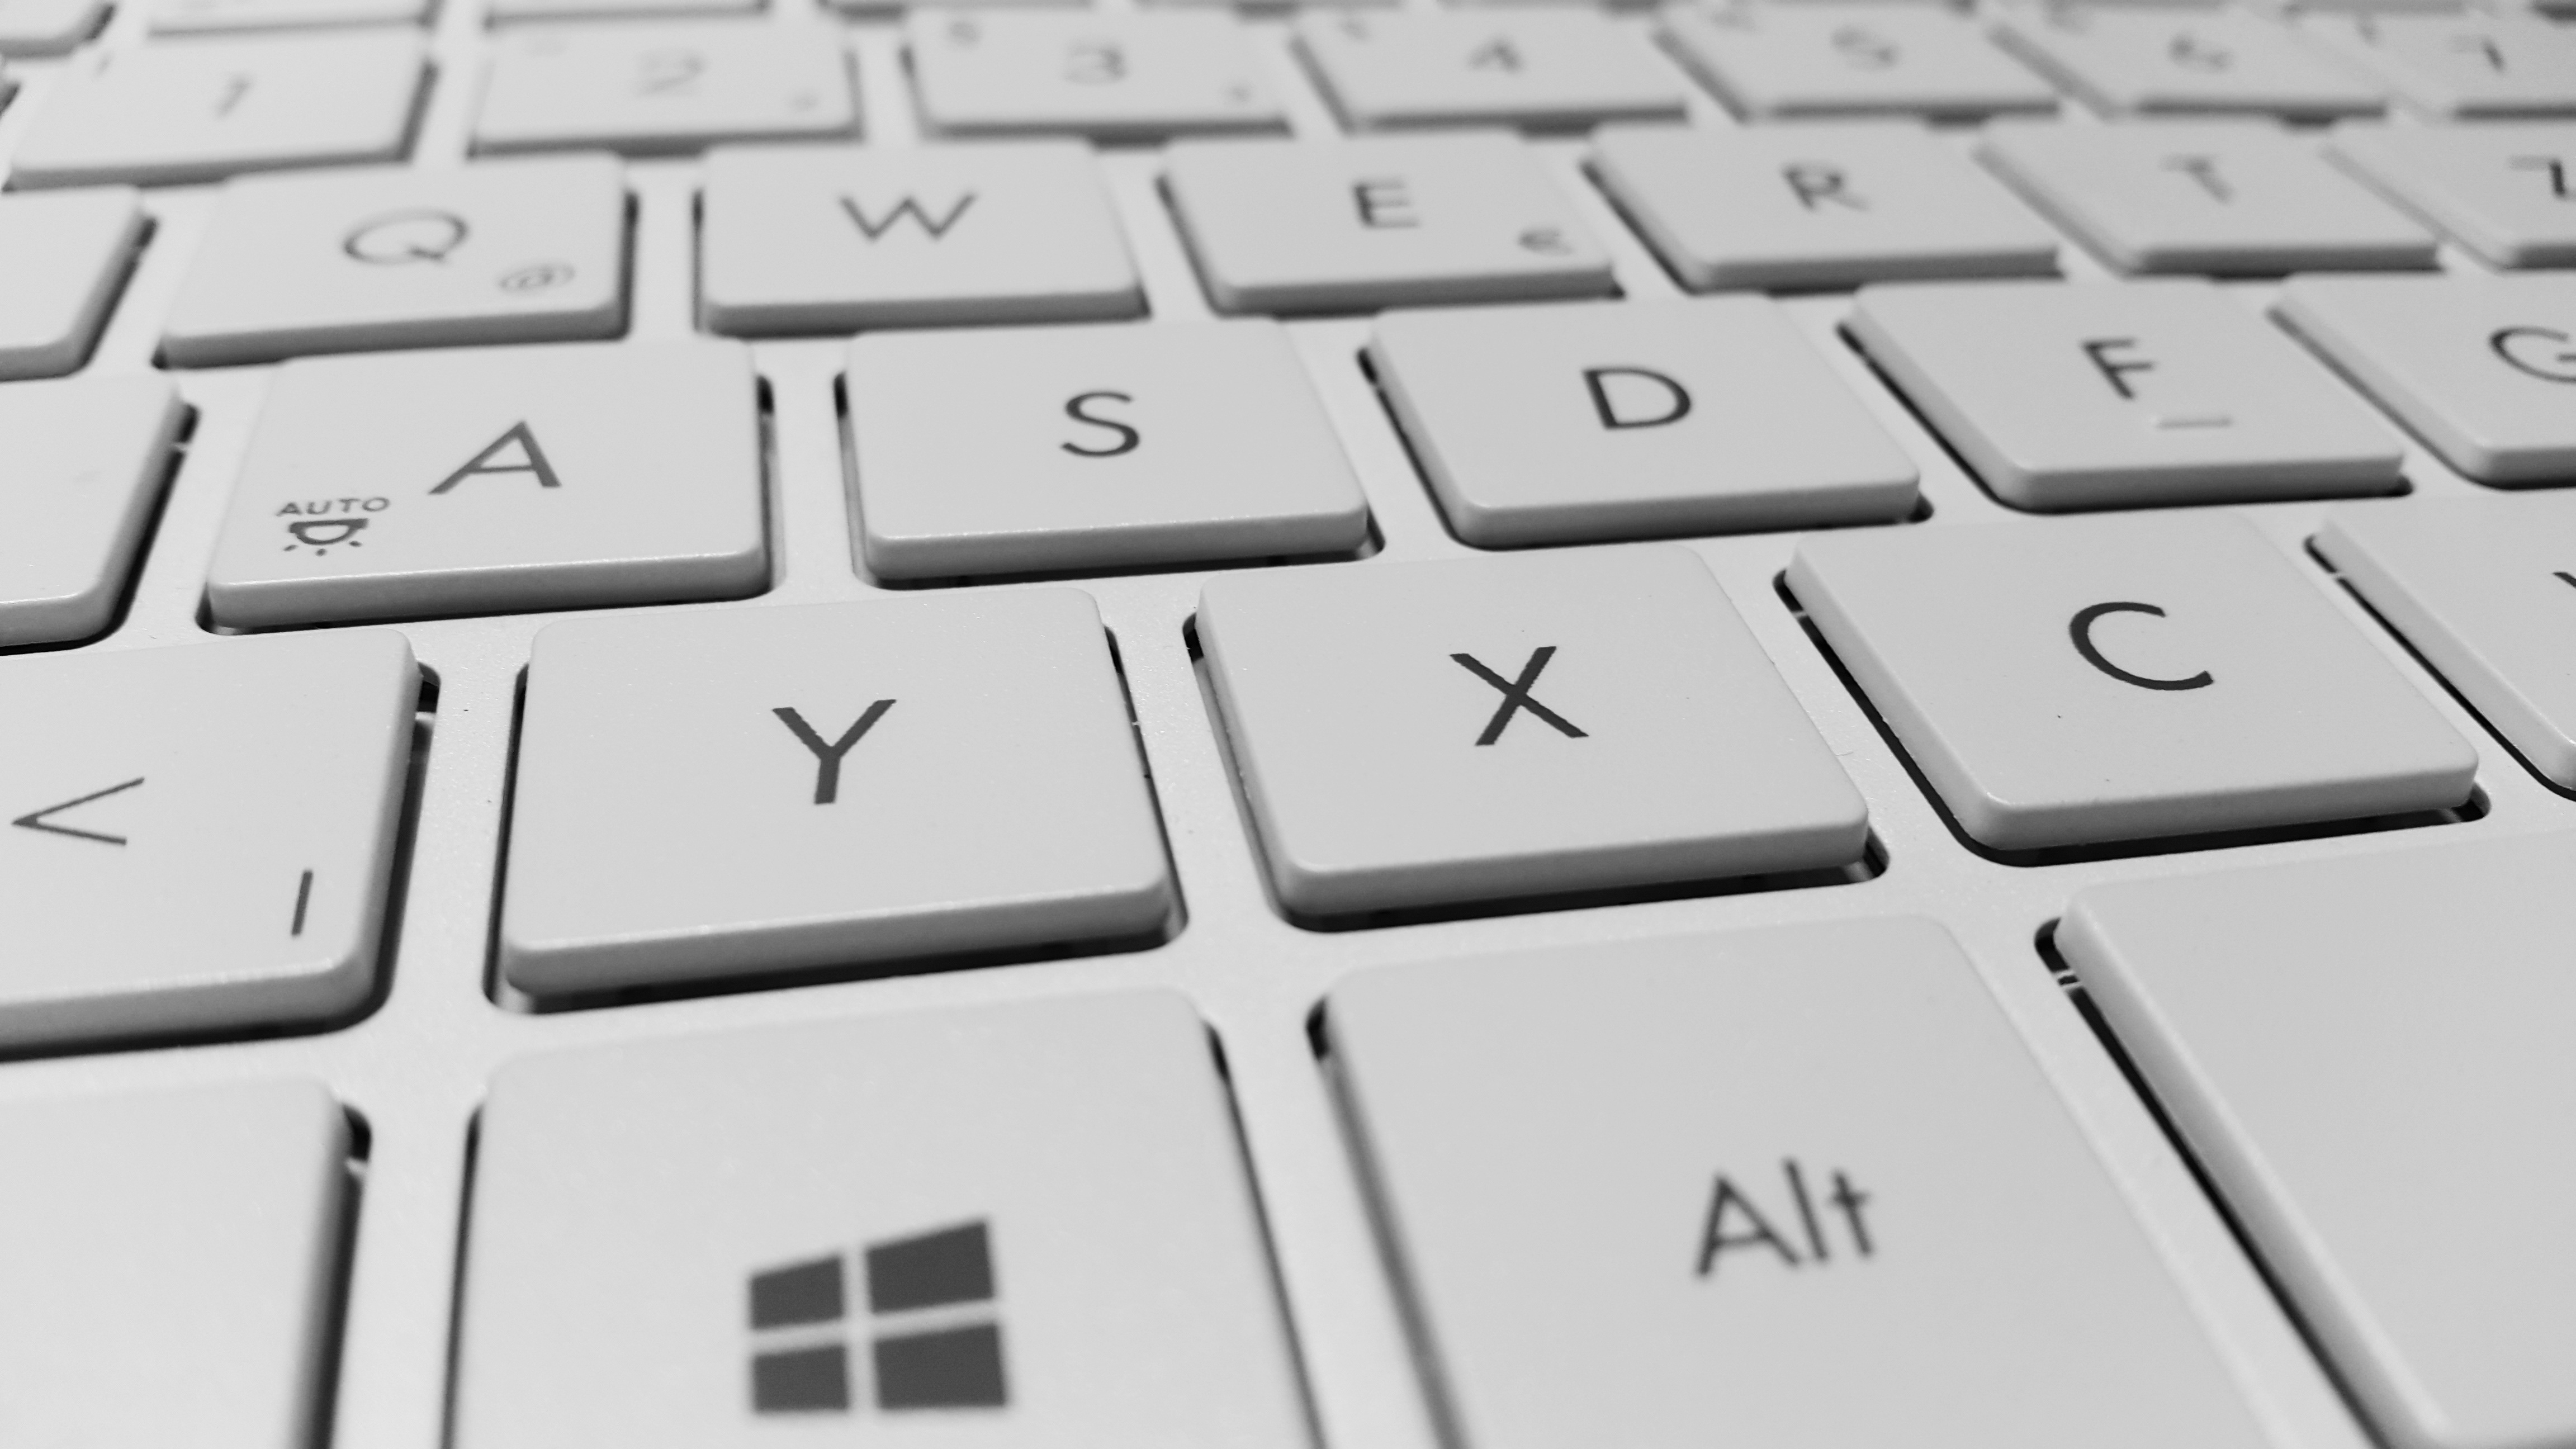 technology, technologies, buttons, letters, keyboard for Windows